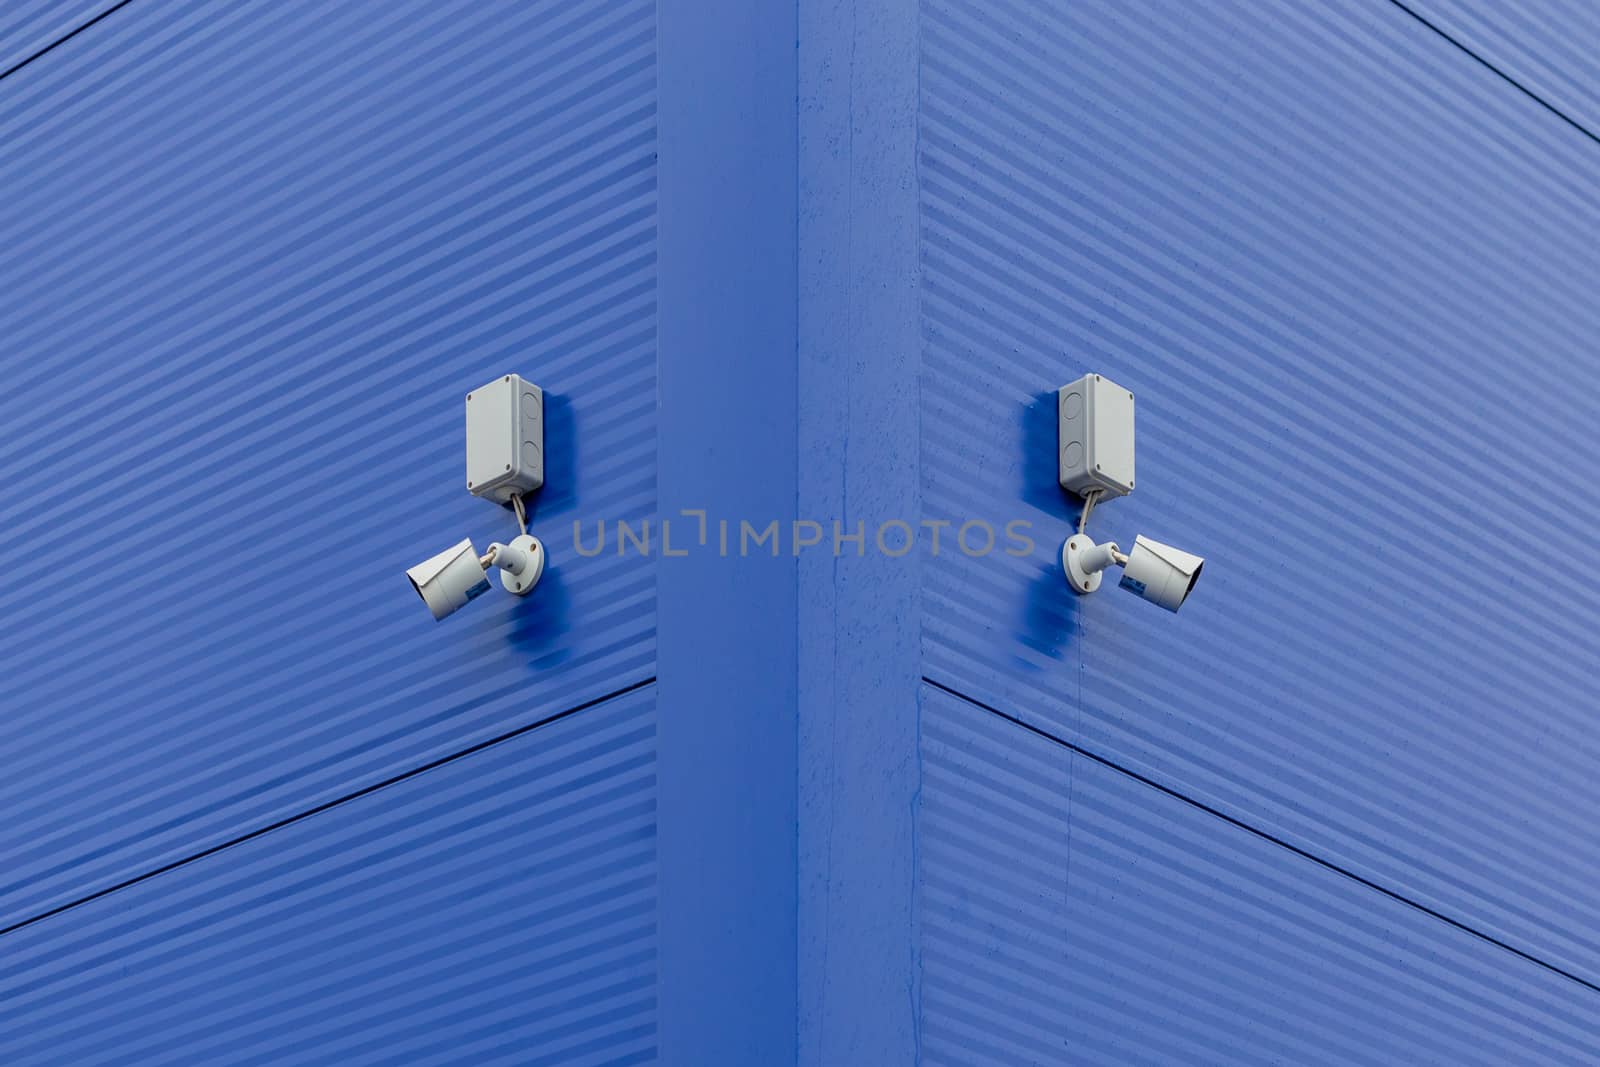 two small white security cameras on blue steel building corner.